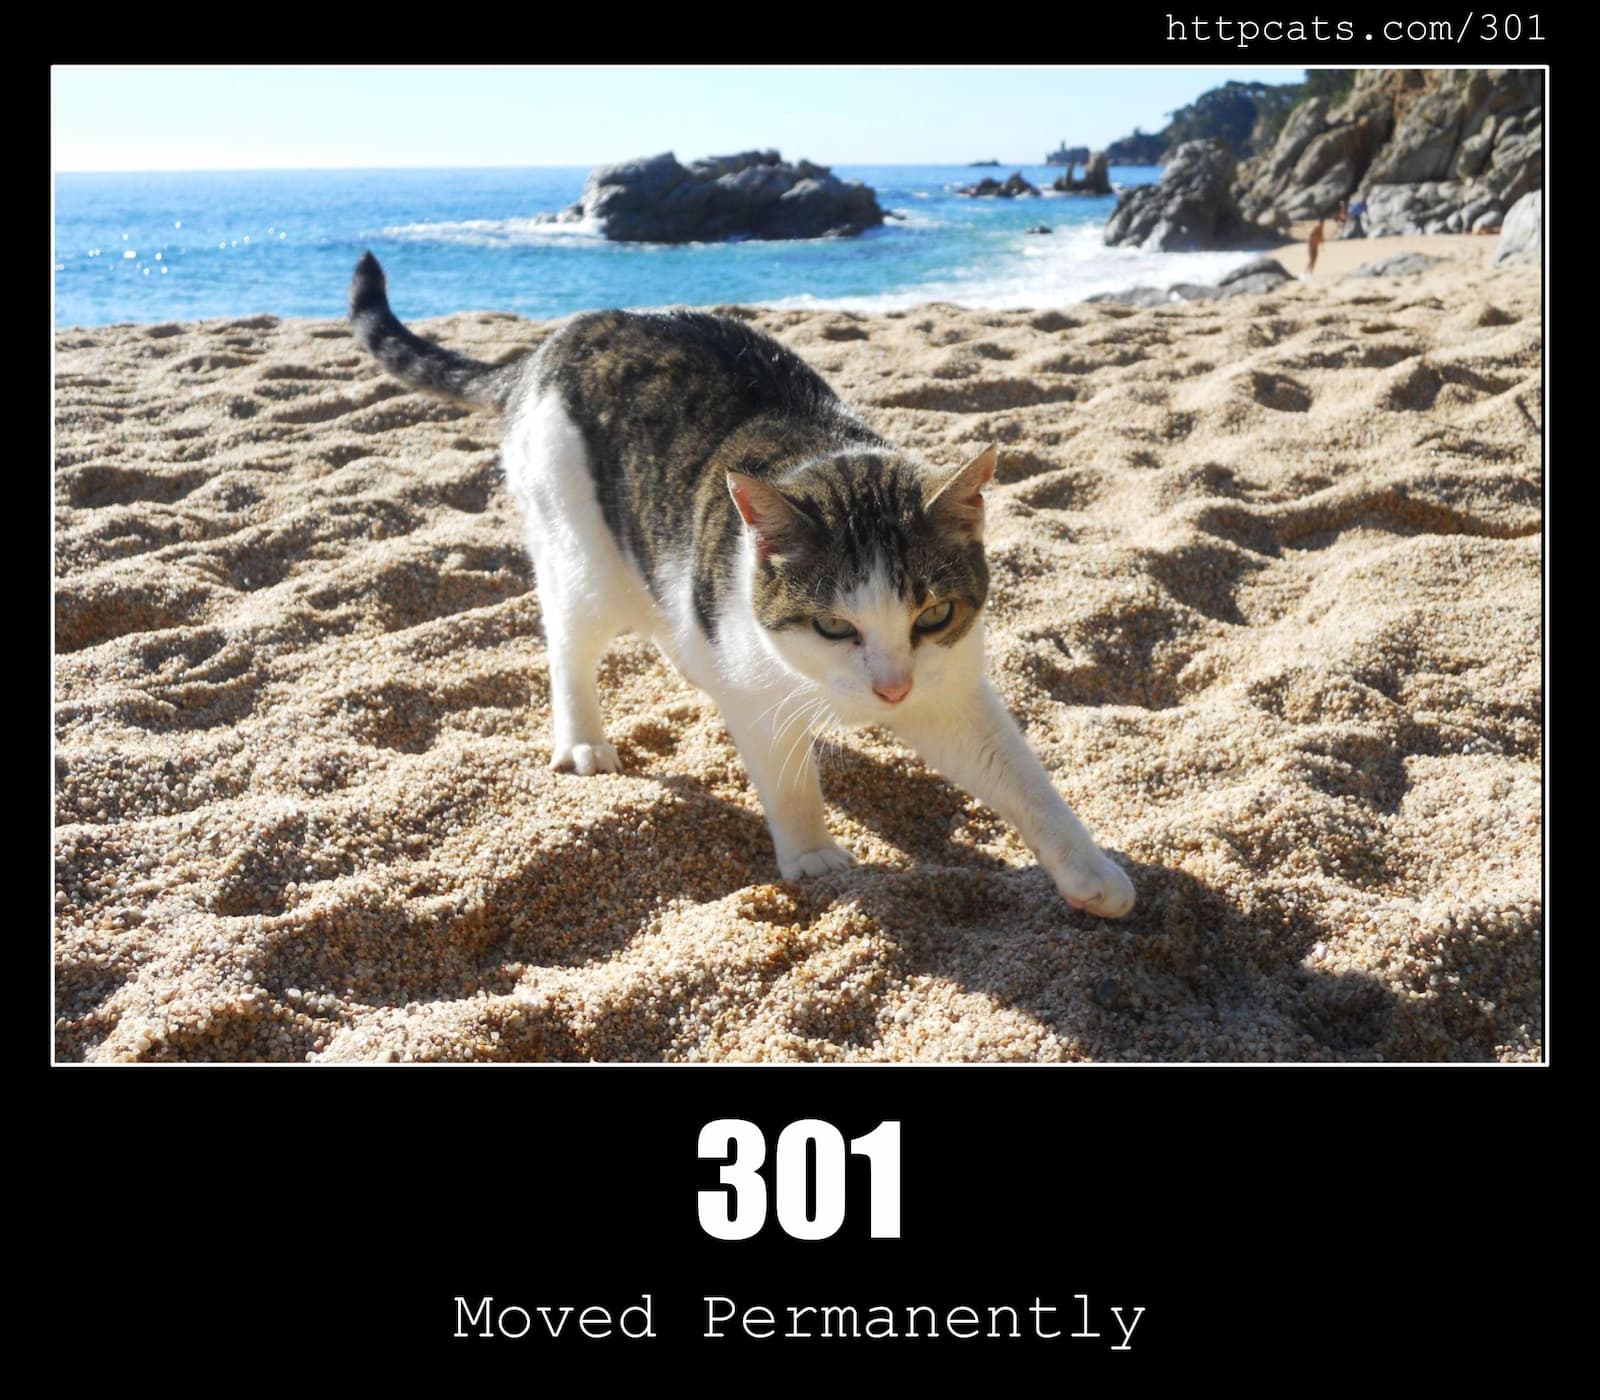 HTTP Status Code 301 Moved Permanently & Cats